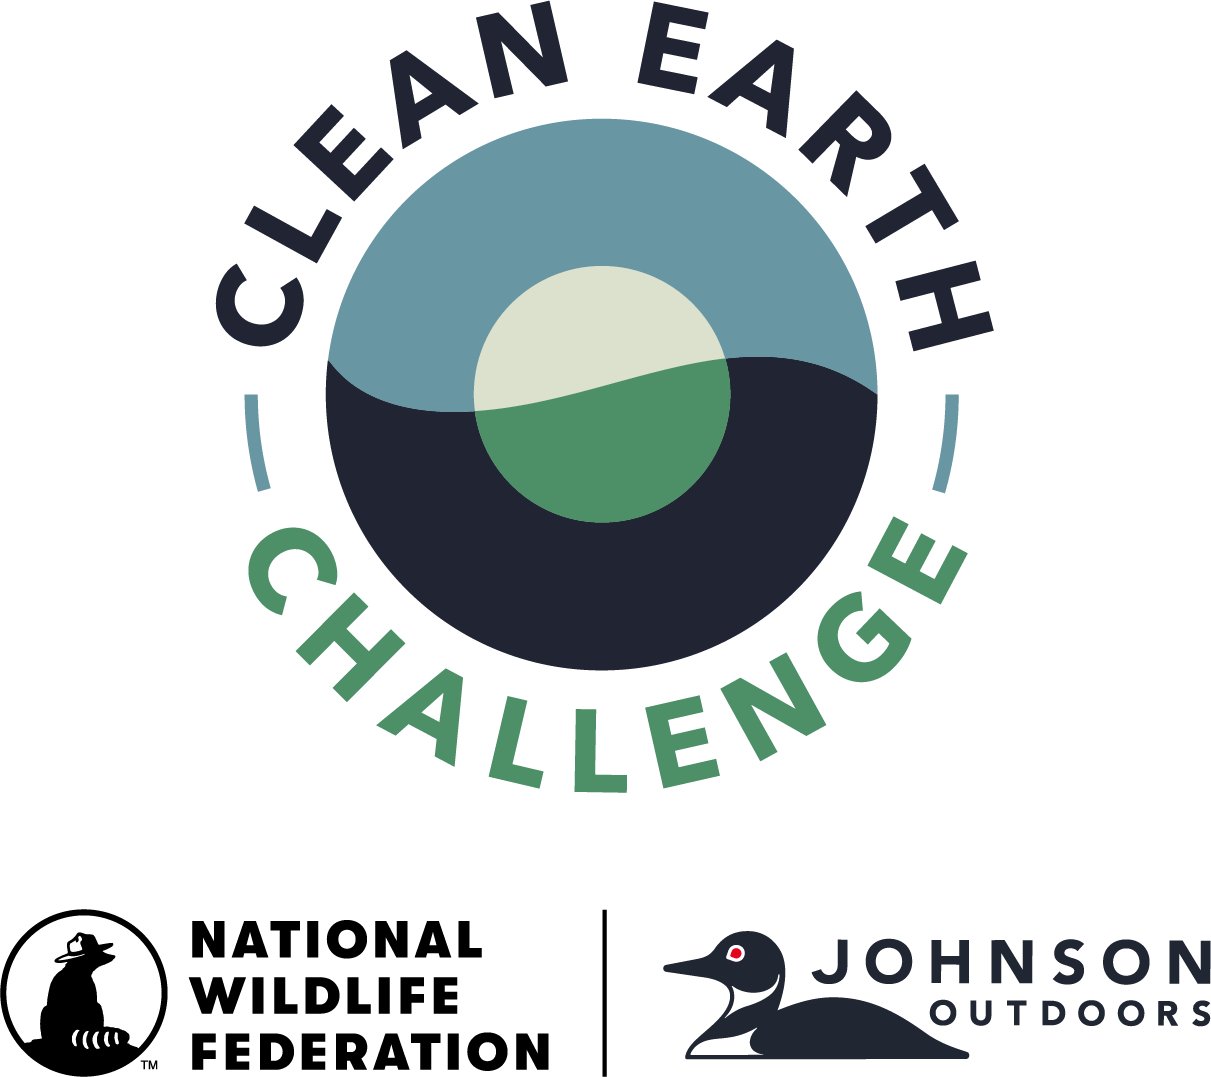 Clean Earth Challenge. A partnership between the National Wildlife Federation and Johnson Outdoors.